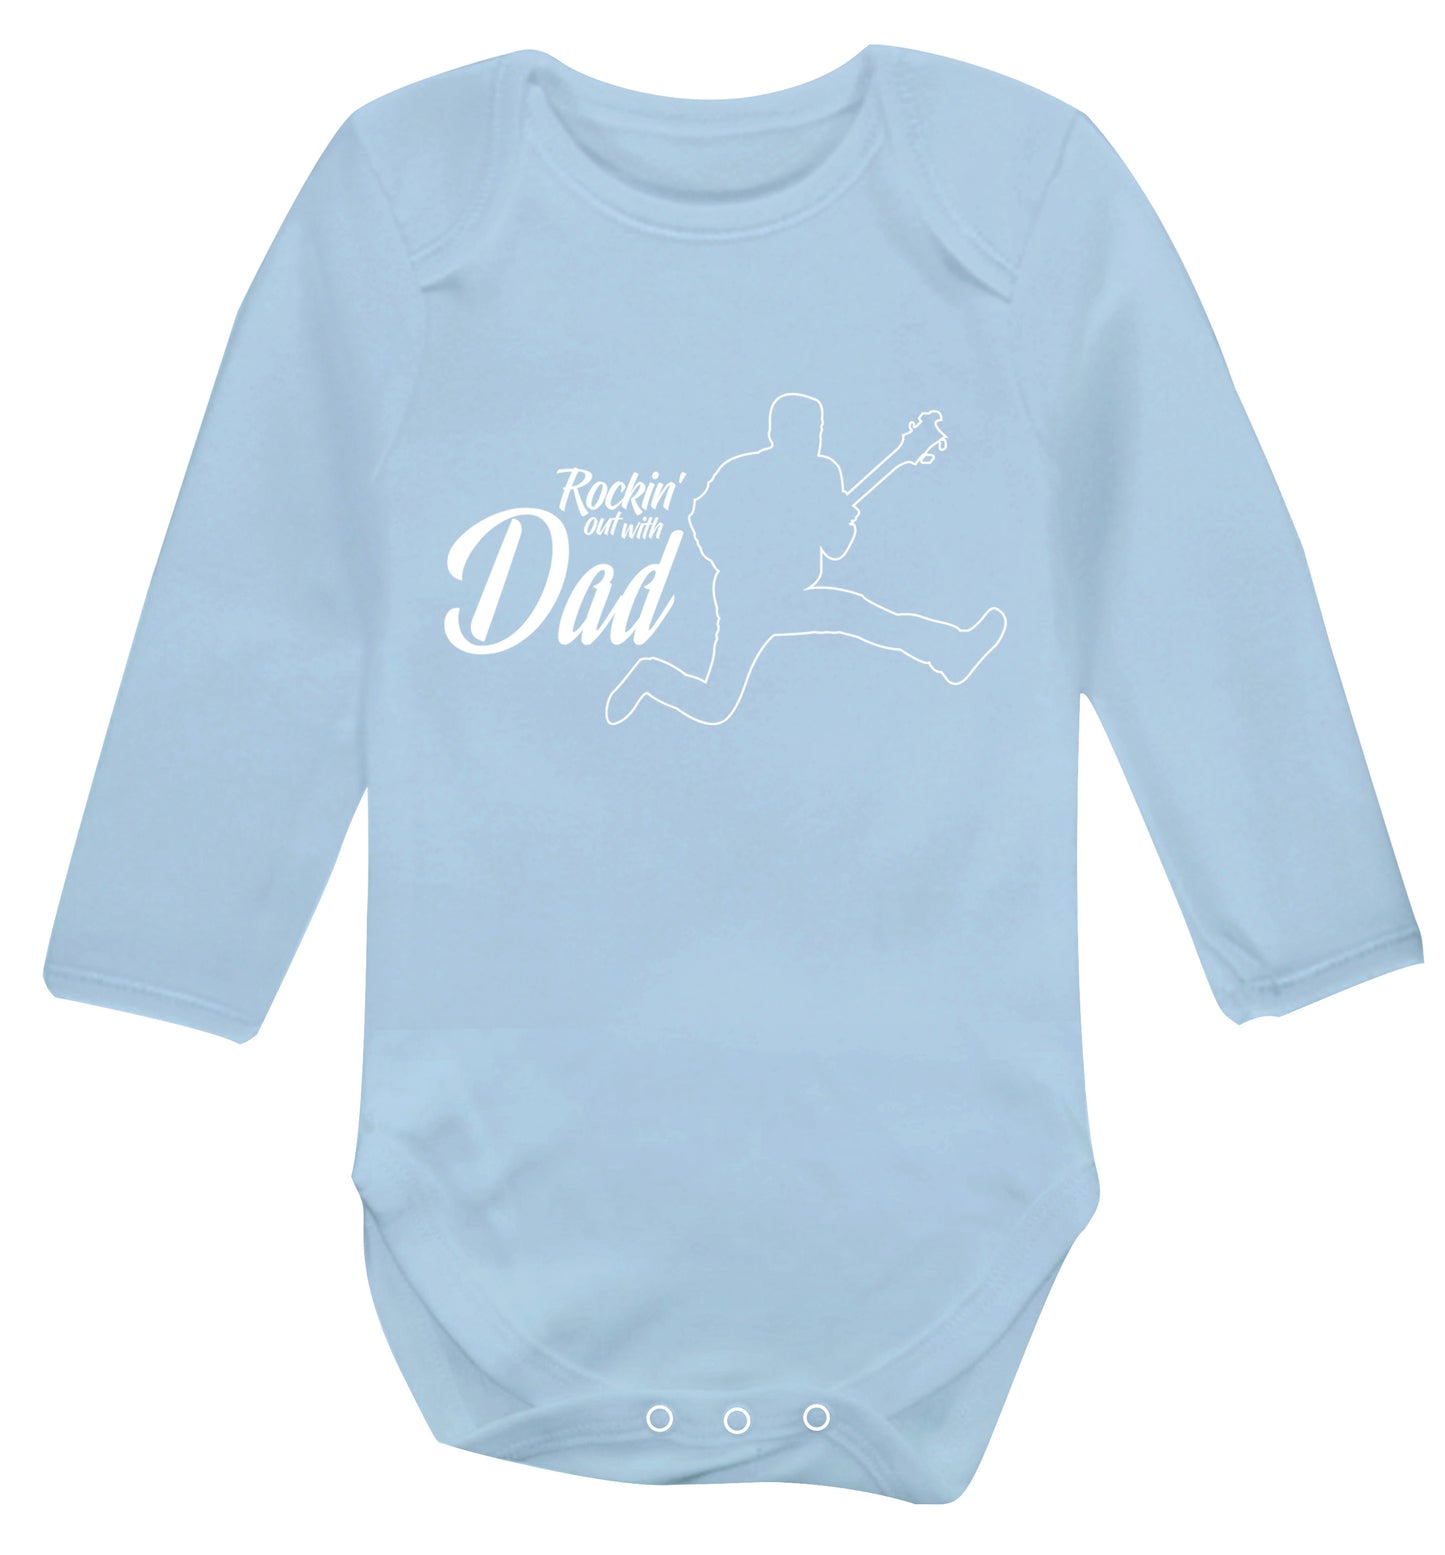 Rockin out with dad Baby Vest long sleeved pale blue 6-12 months